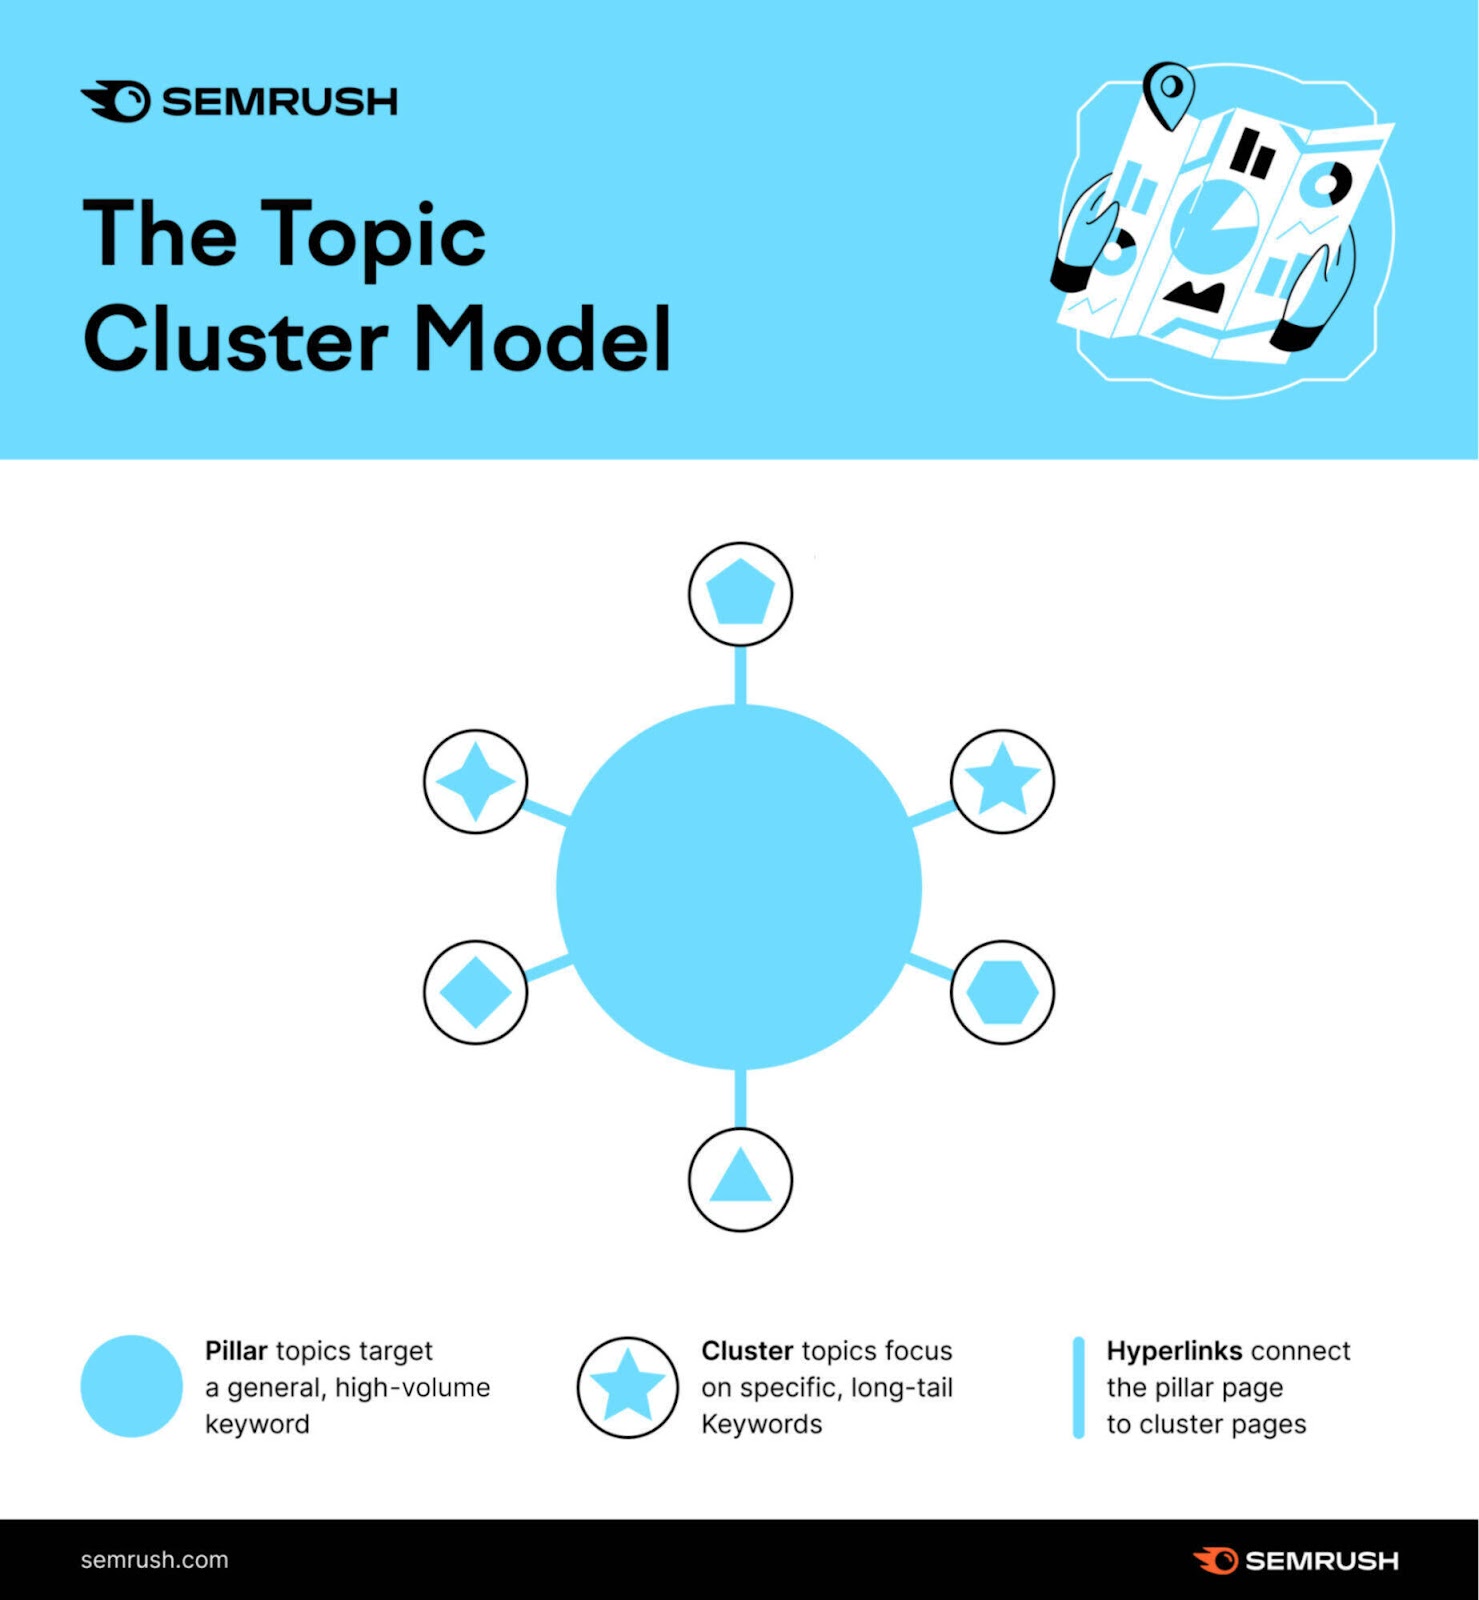 Semrush's infographic showing the topic cluster model